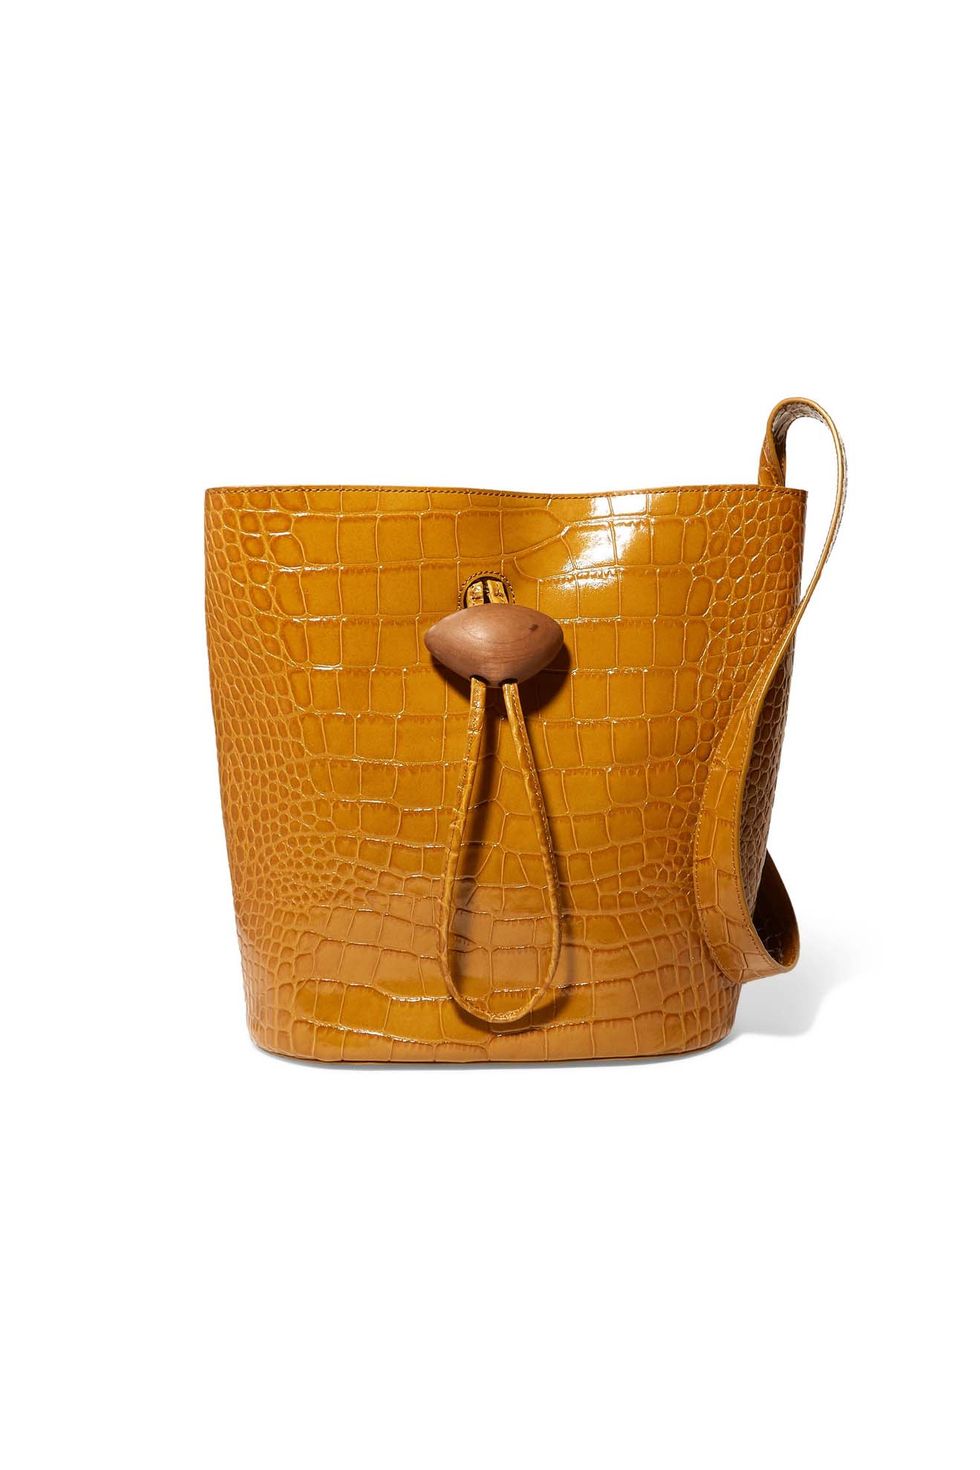 27 Half Price Designer Bags From The Summer Sales